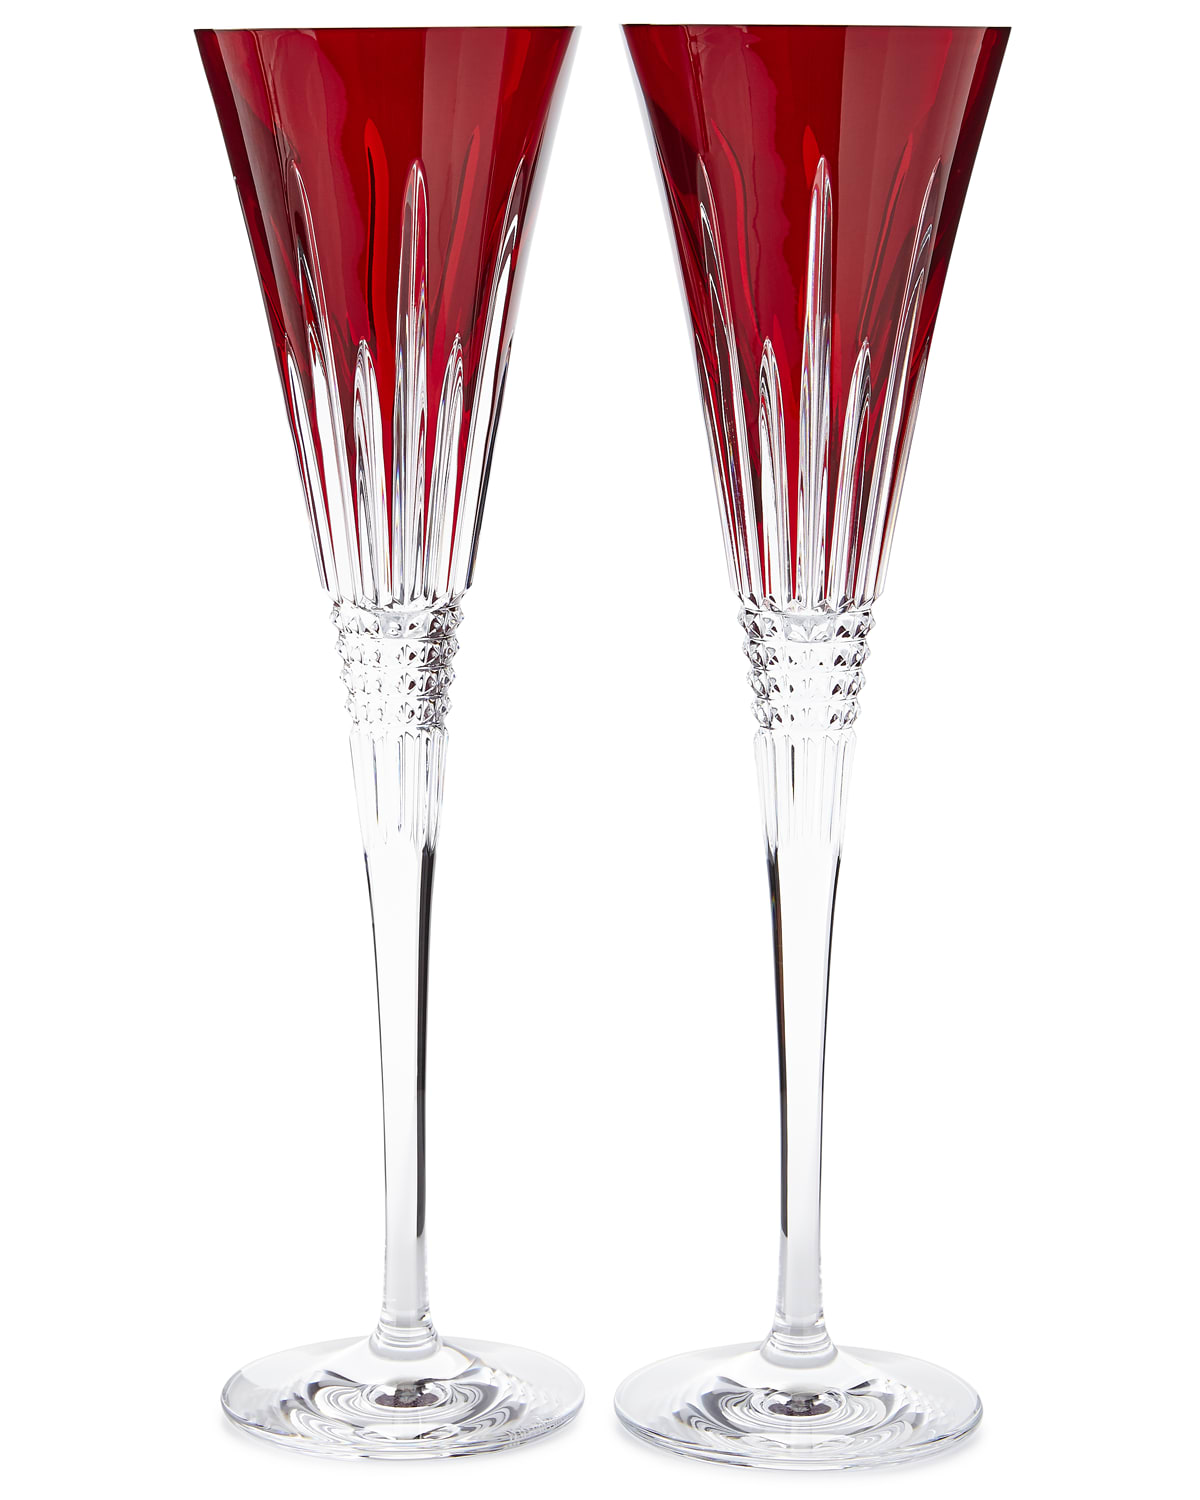 Image Waterford Crystal Lismore Diamond Toasting Flutes, Red, Set of 2